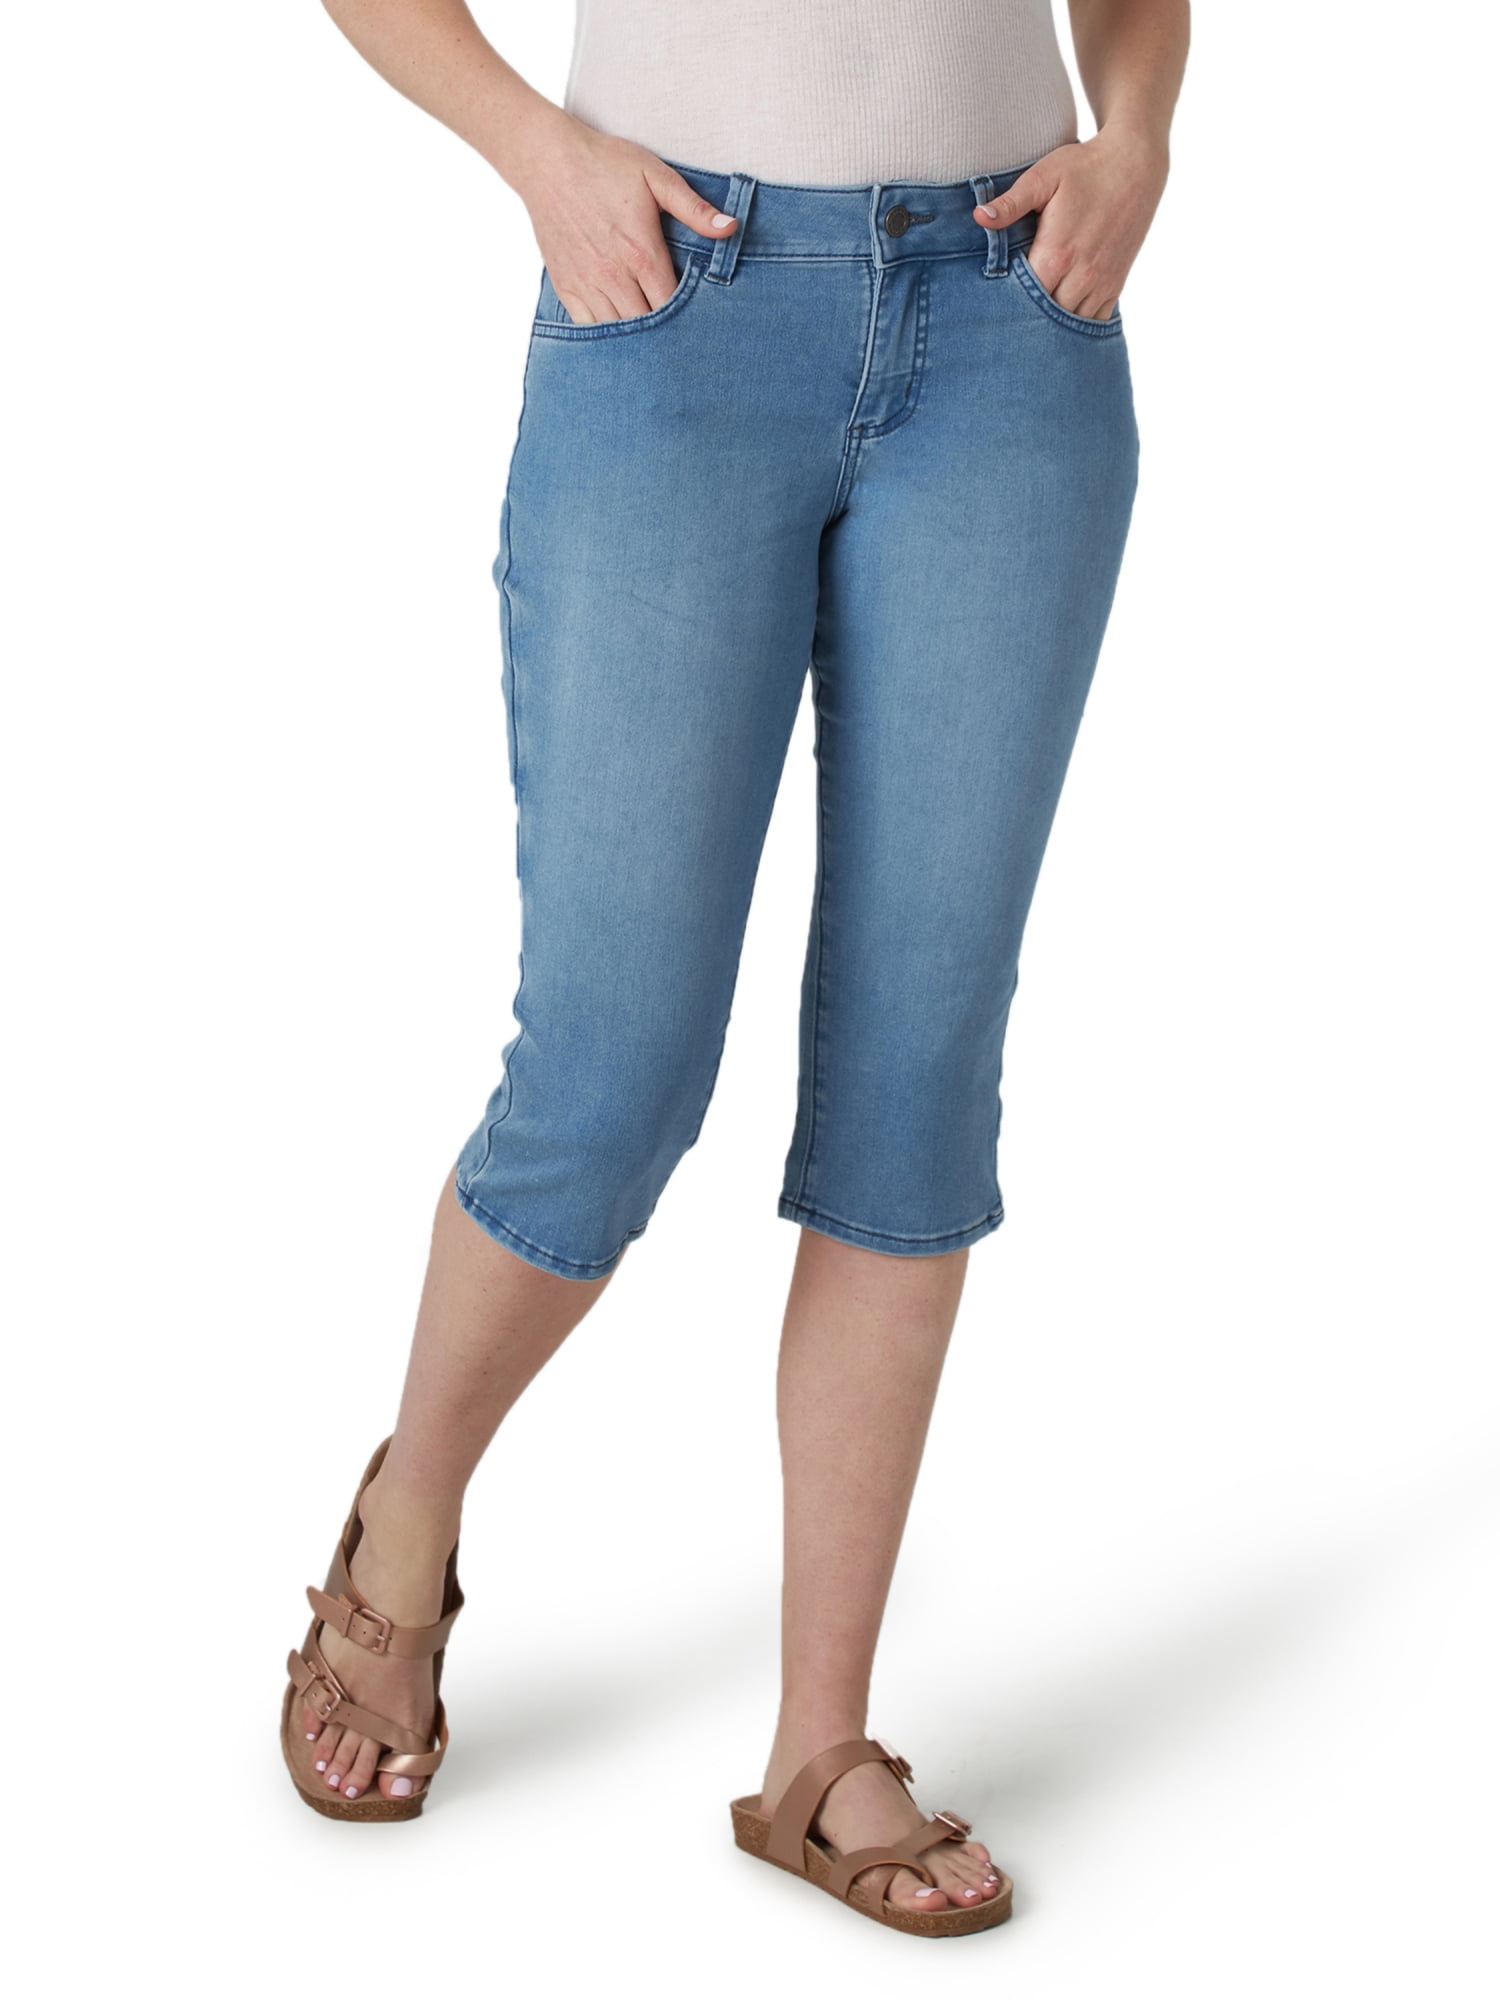 Buy ZHUER Plus Size Capris for Women Jean Leggings High Waisted Stretch  Denim Capri Cropped Leggings Jean Look Jeggings Tights at Amazon.in